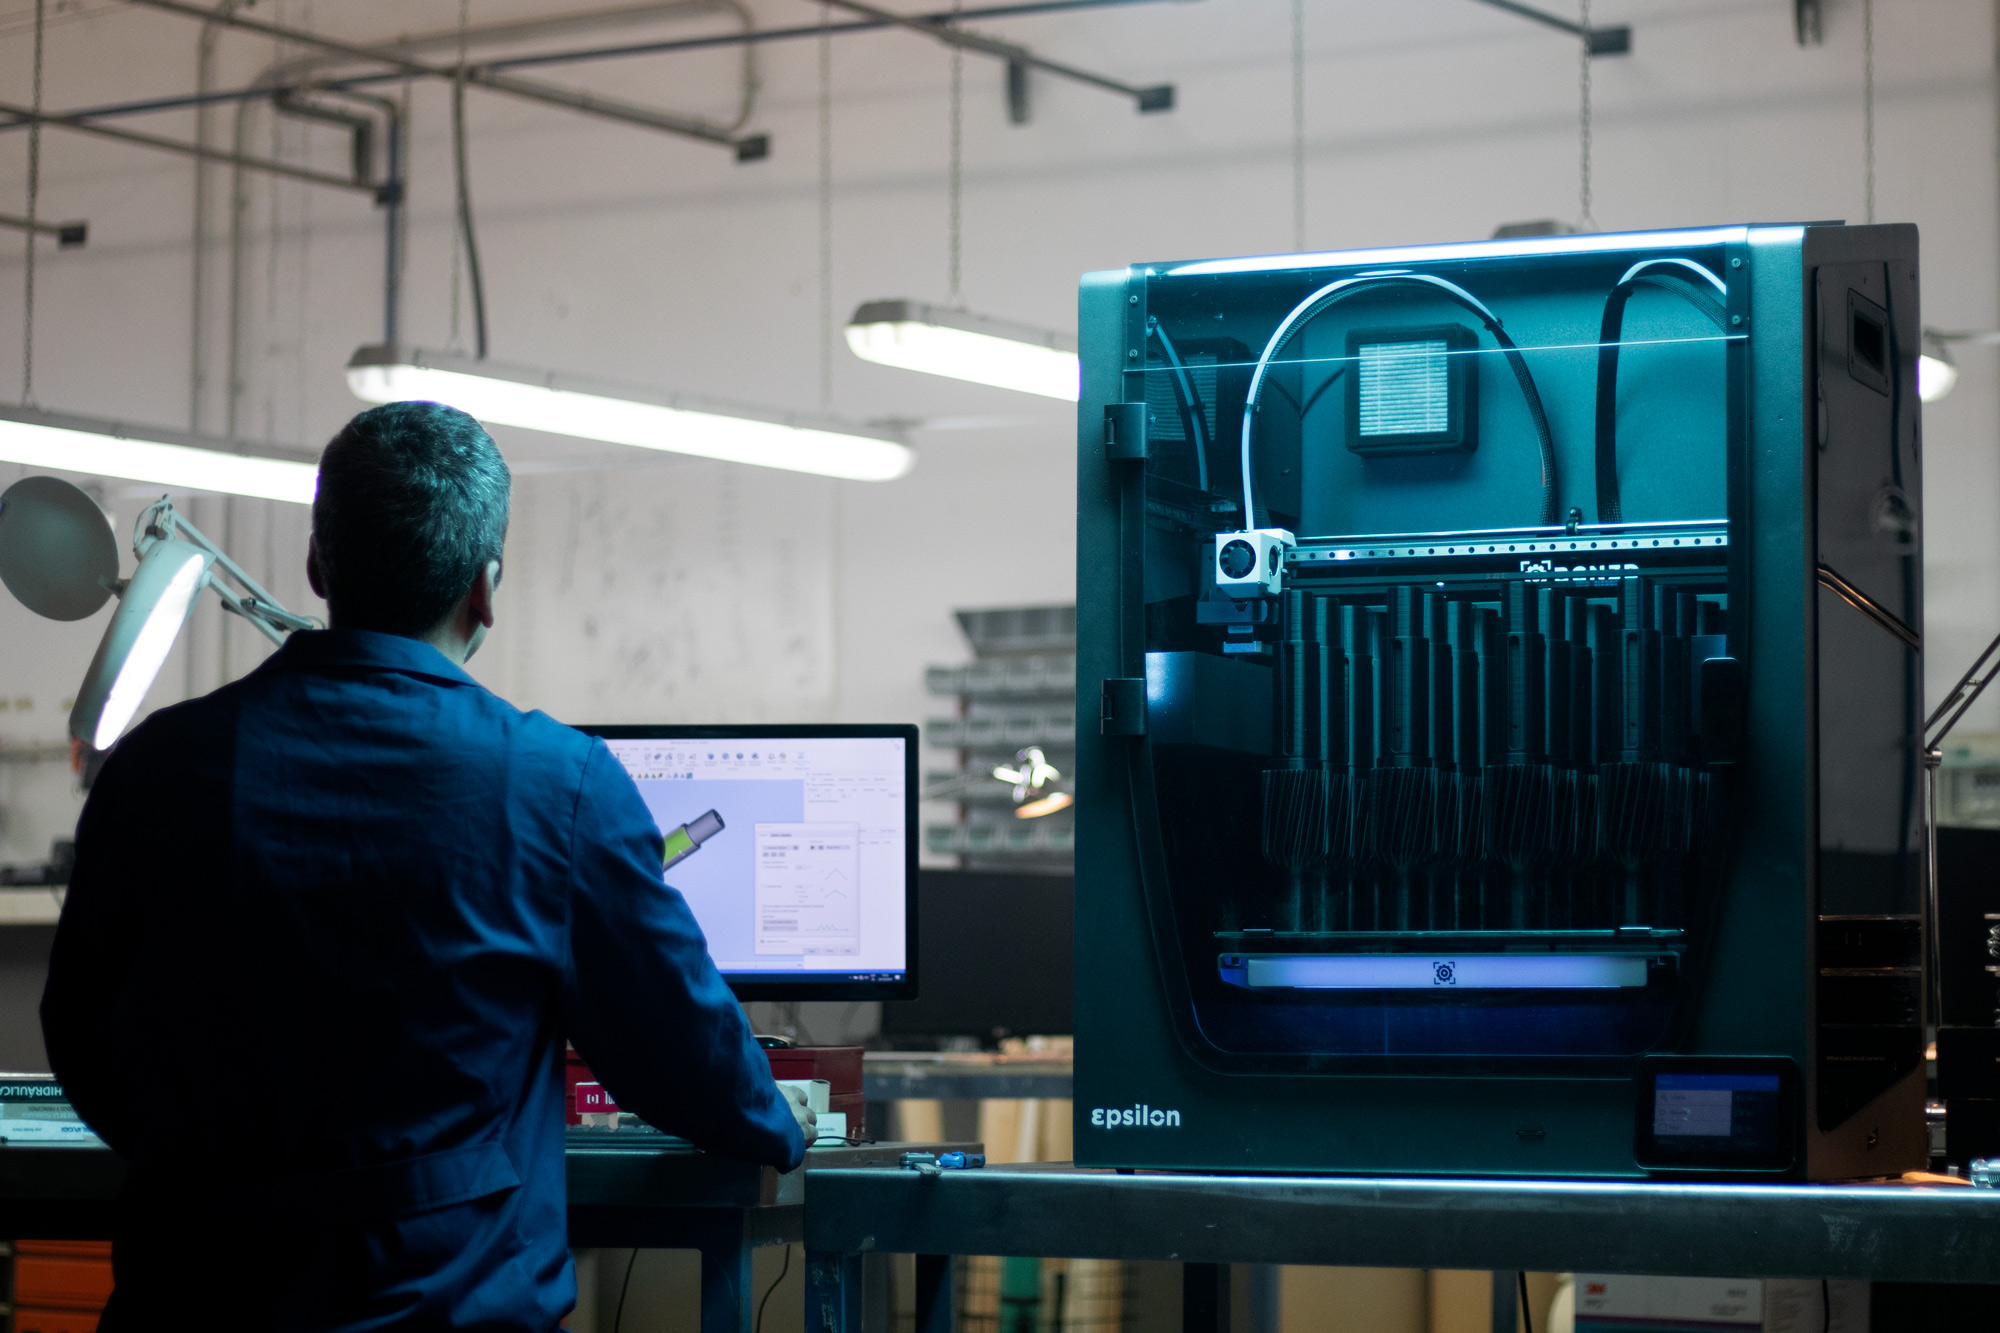 DANOBATGROUP invests in the BCN3D startup in order to diversify its technological offer